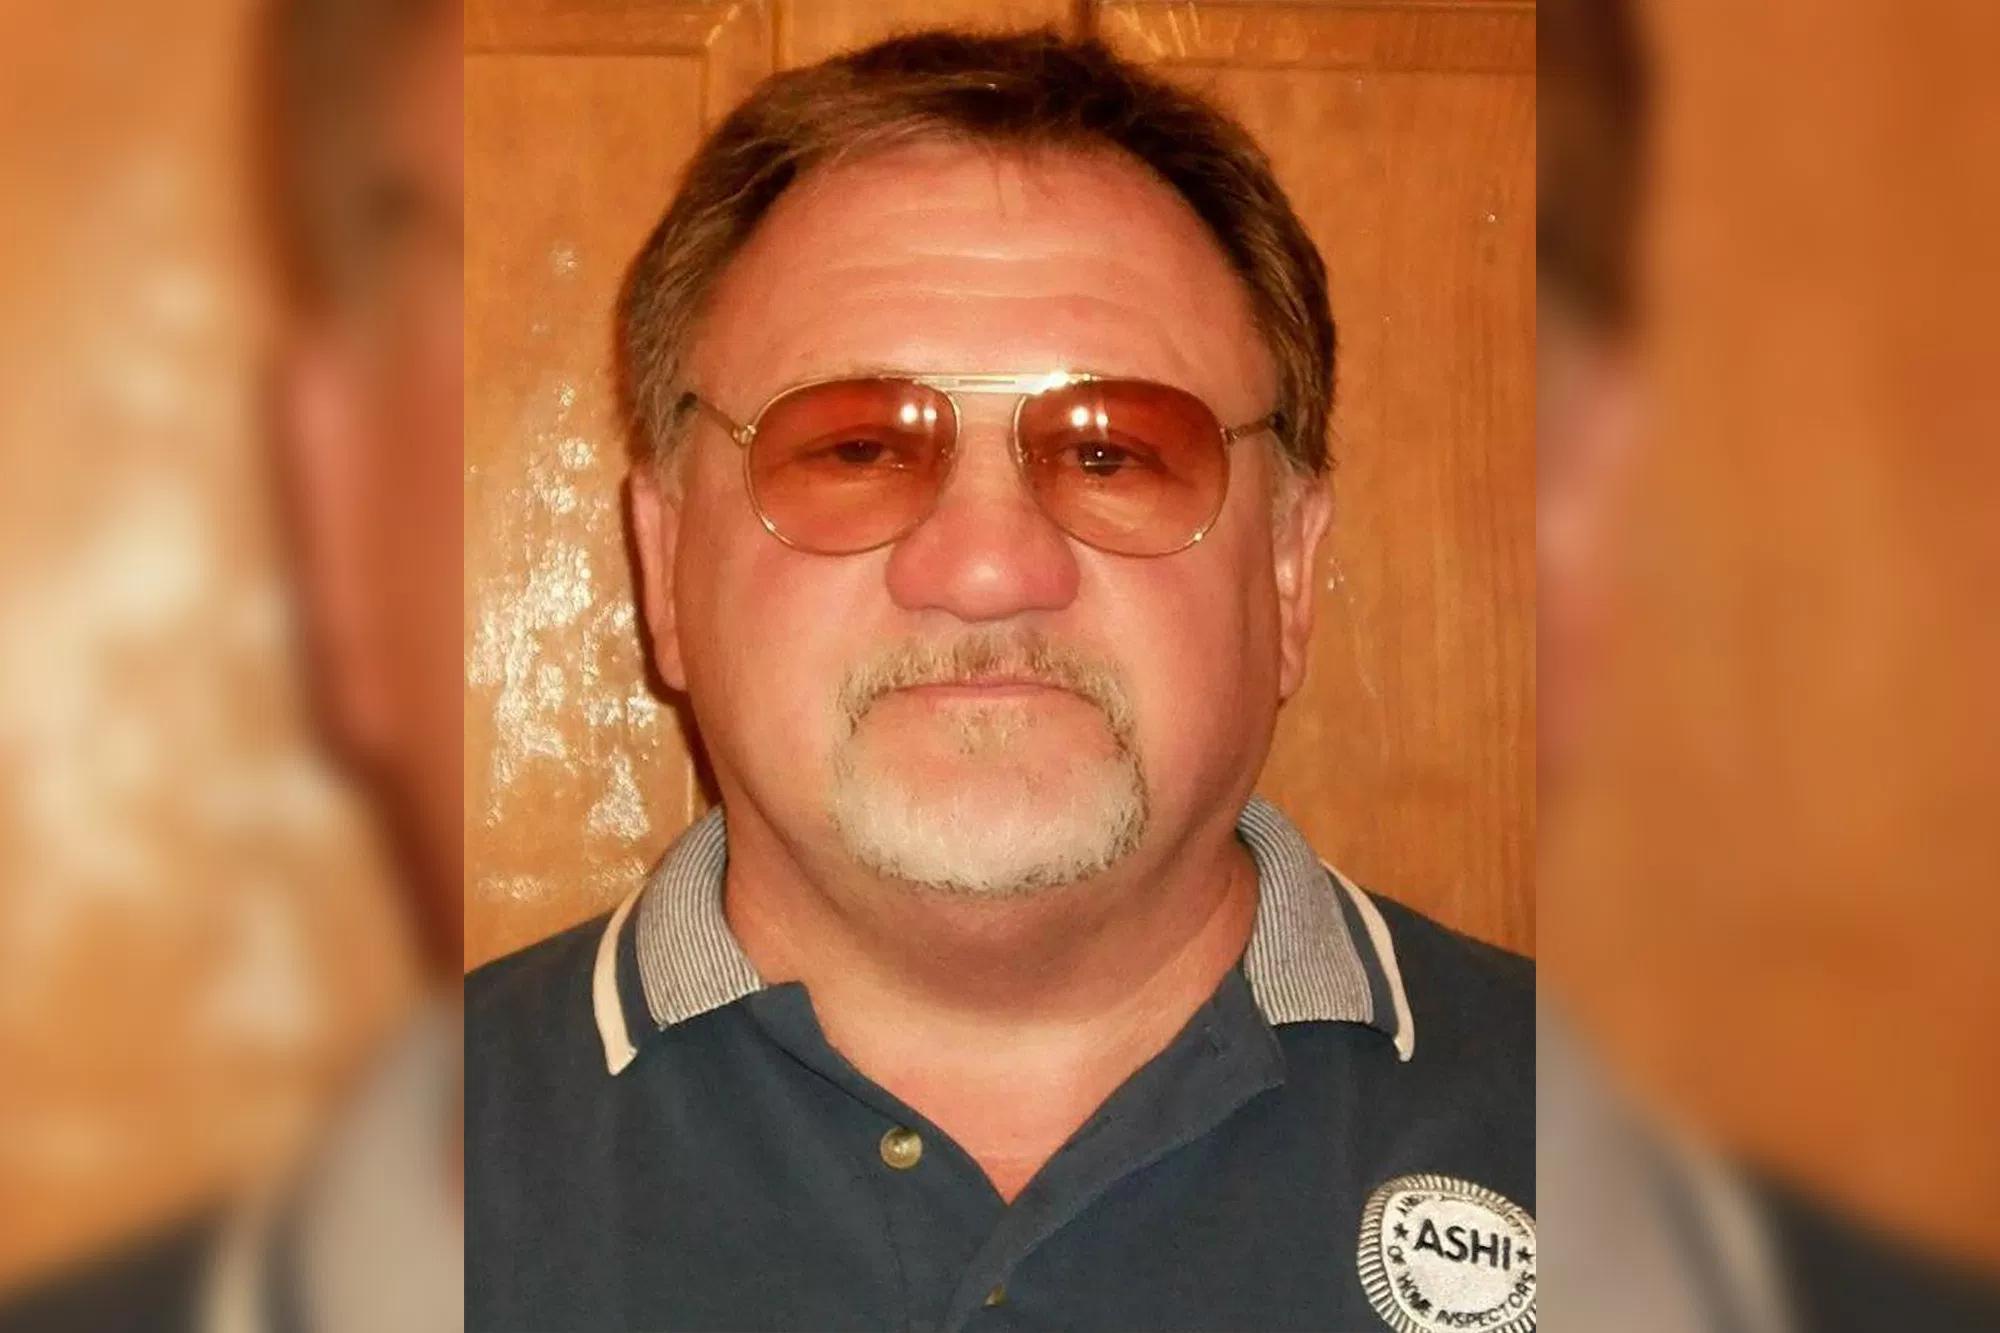 Thank God the congressional baseball shooter was not an immigrant or Muslim